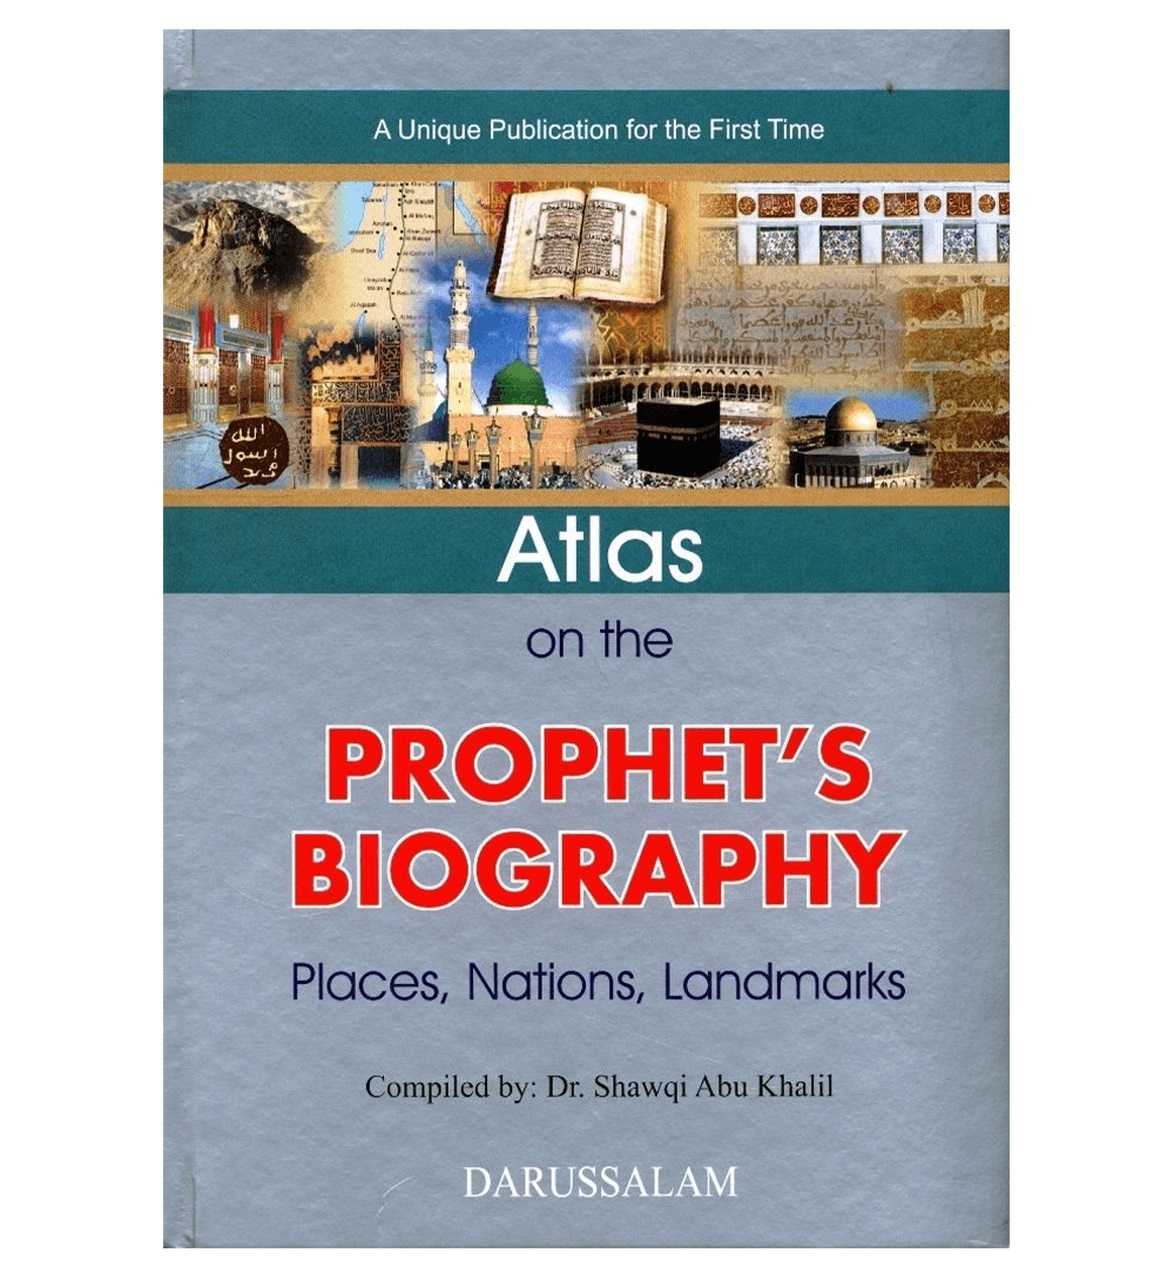 Atlas on the Prophets Biography (Places Nations Landmarks)